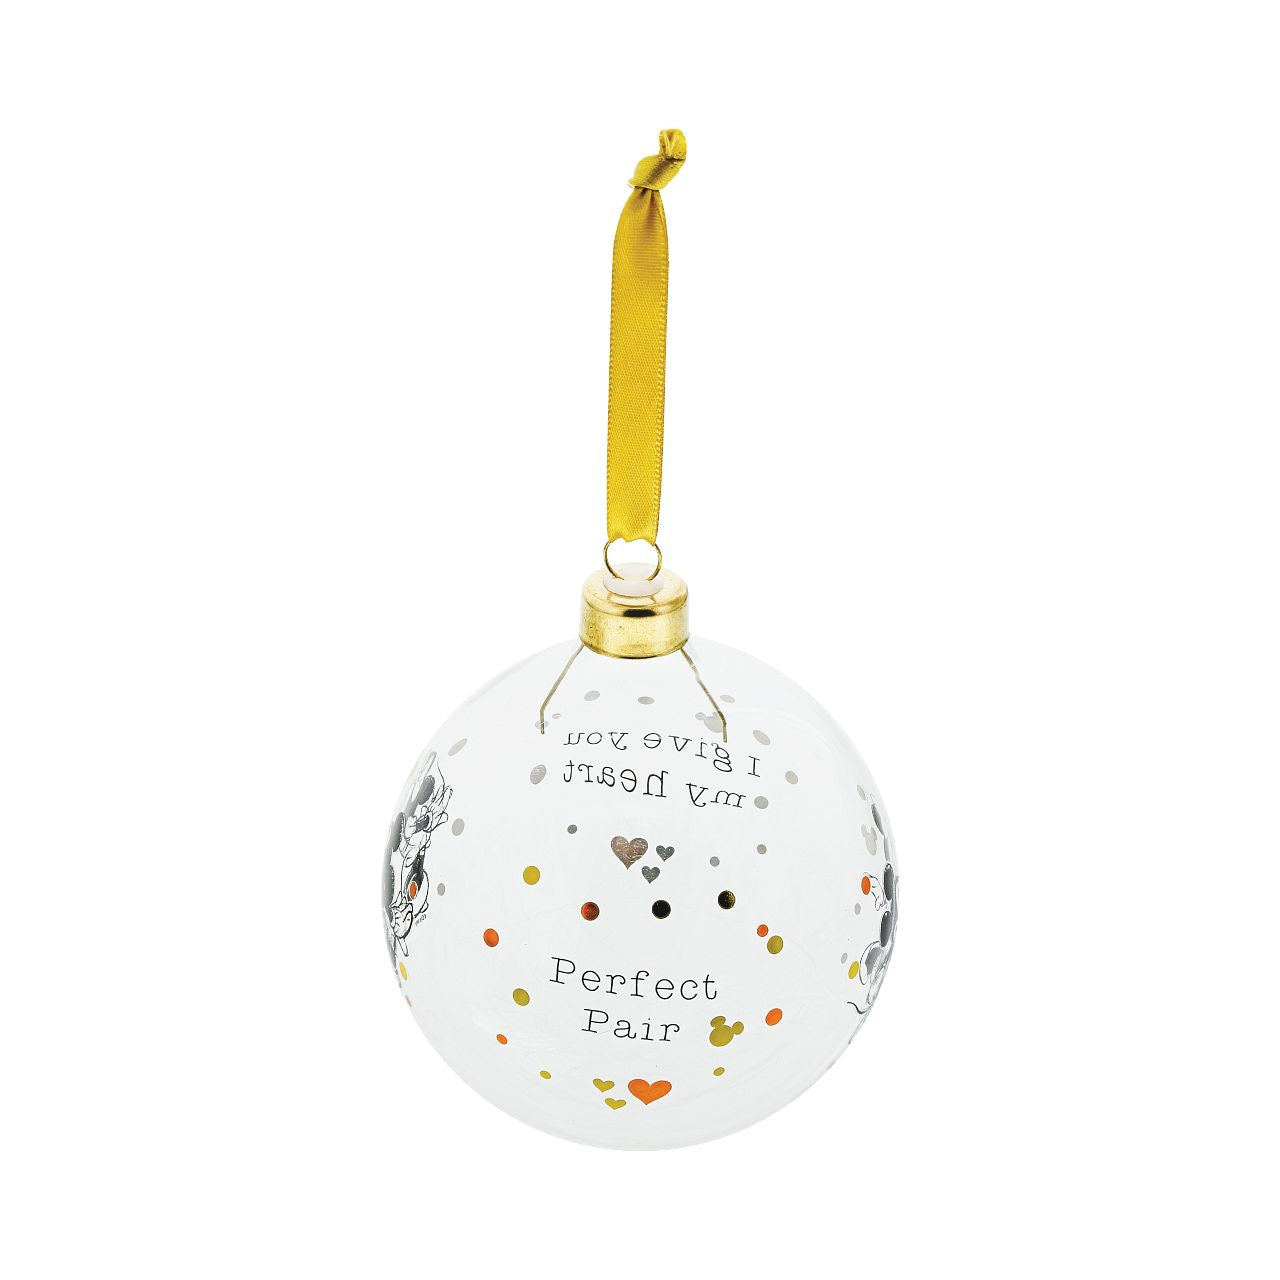 Disney Mickey and Minnie Mouse Christmas Bauble  This glass Mickey and Minnie Mouse bauble is the perfect gift to remind the happy couple they are the perfect pair. The bauble is strung with gold ribbon and is presented in a Disney branded gift box.